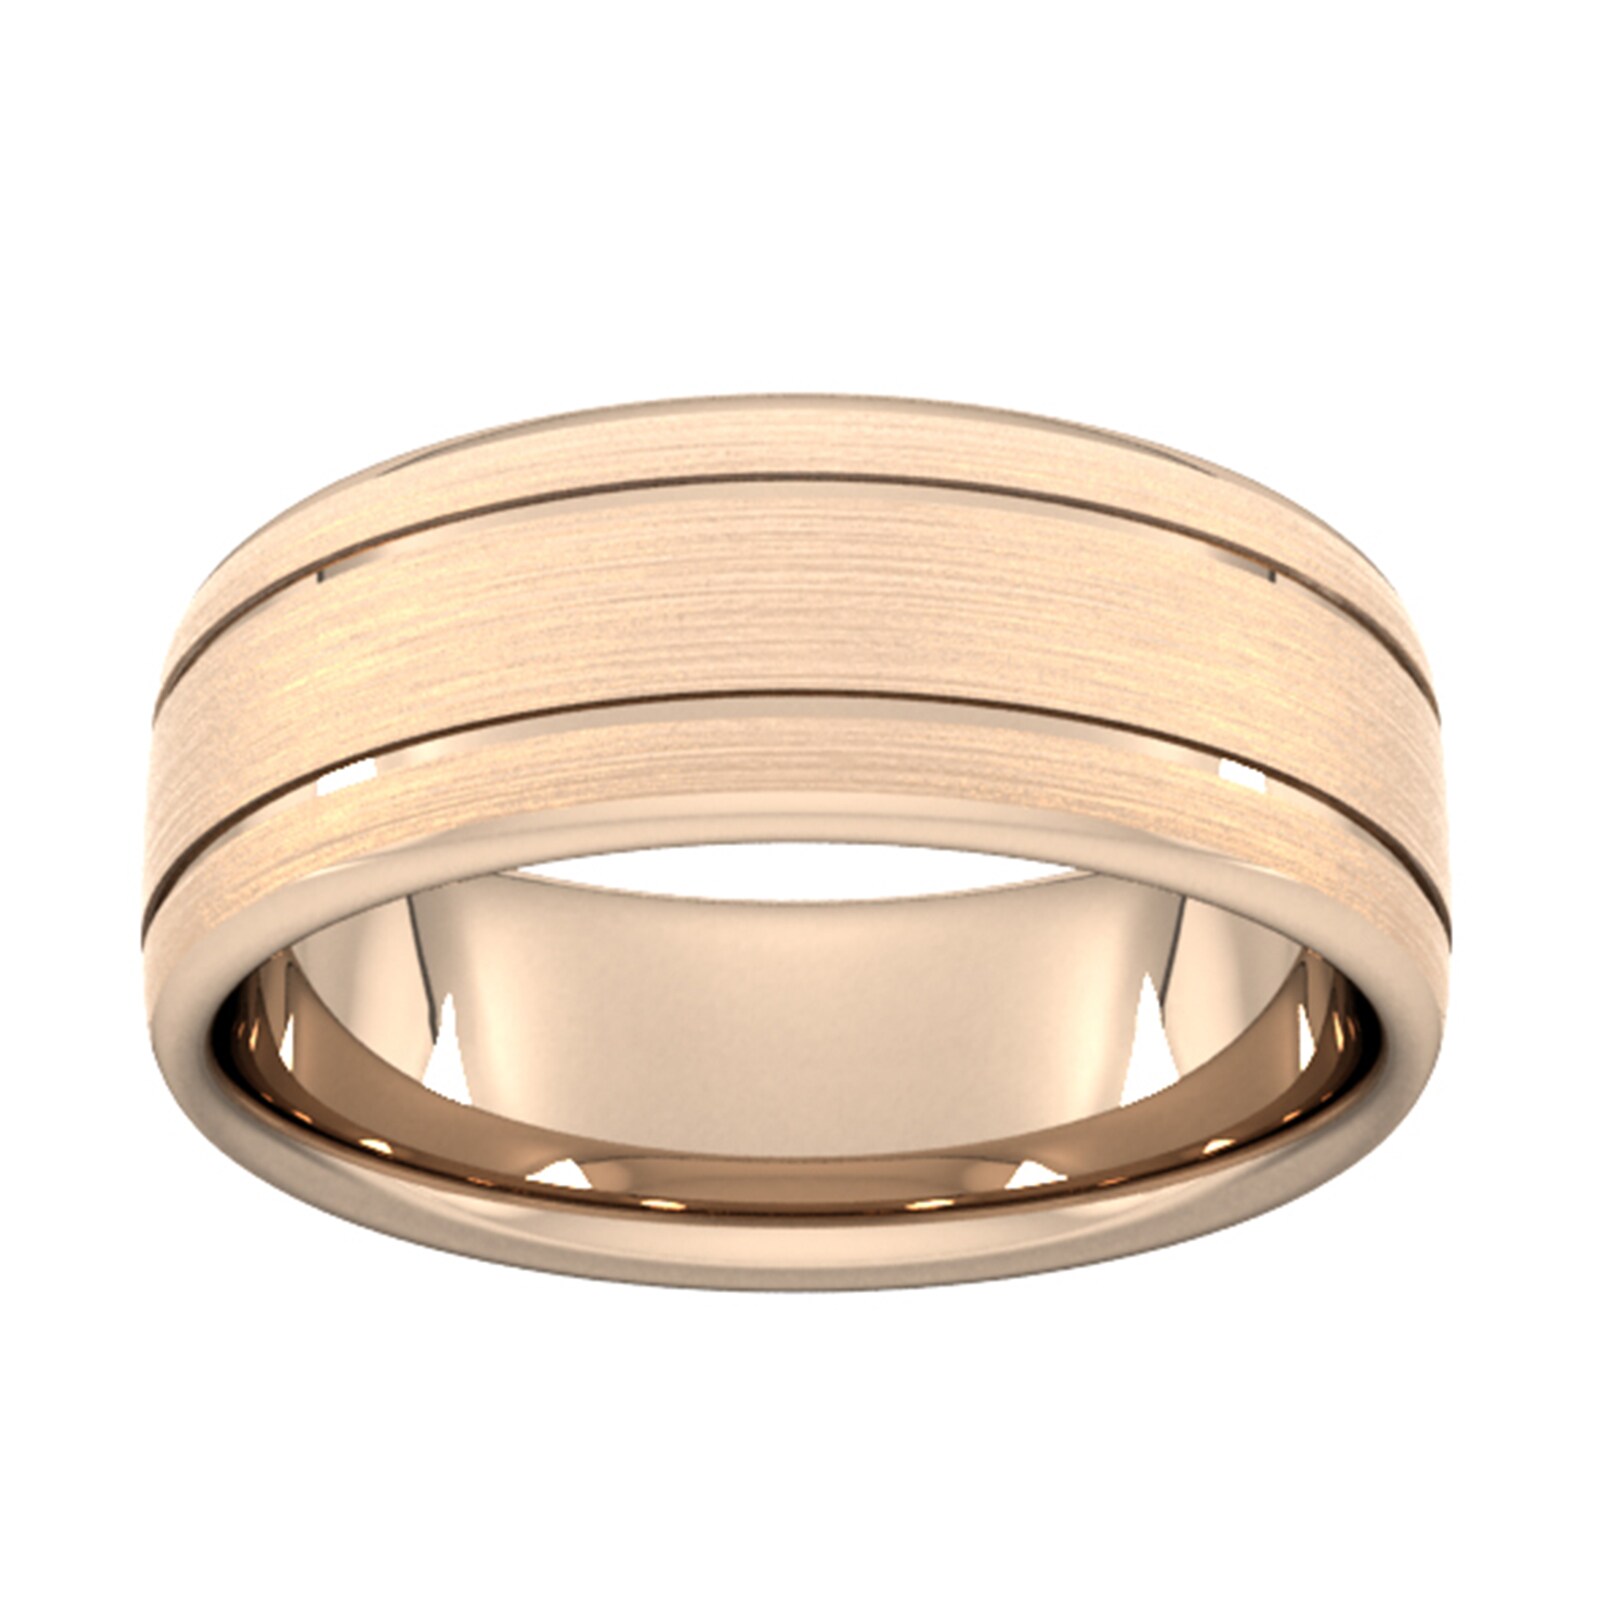 8mm Flat Court Heavy Matt Finish With Double Grooves Wedding Ring In 9 Carat Rose Gold - Ring Size P